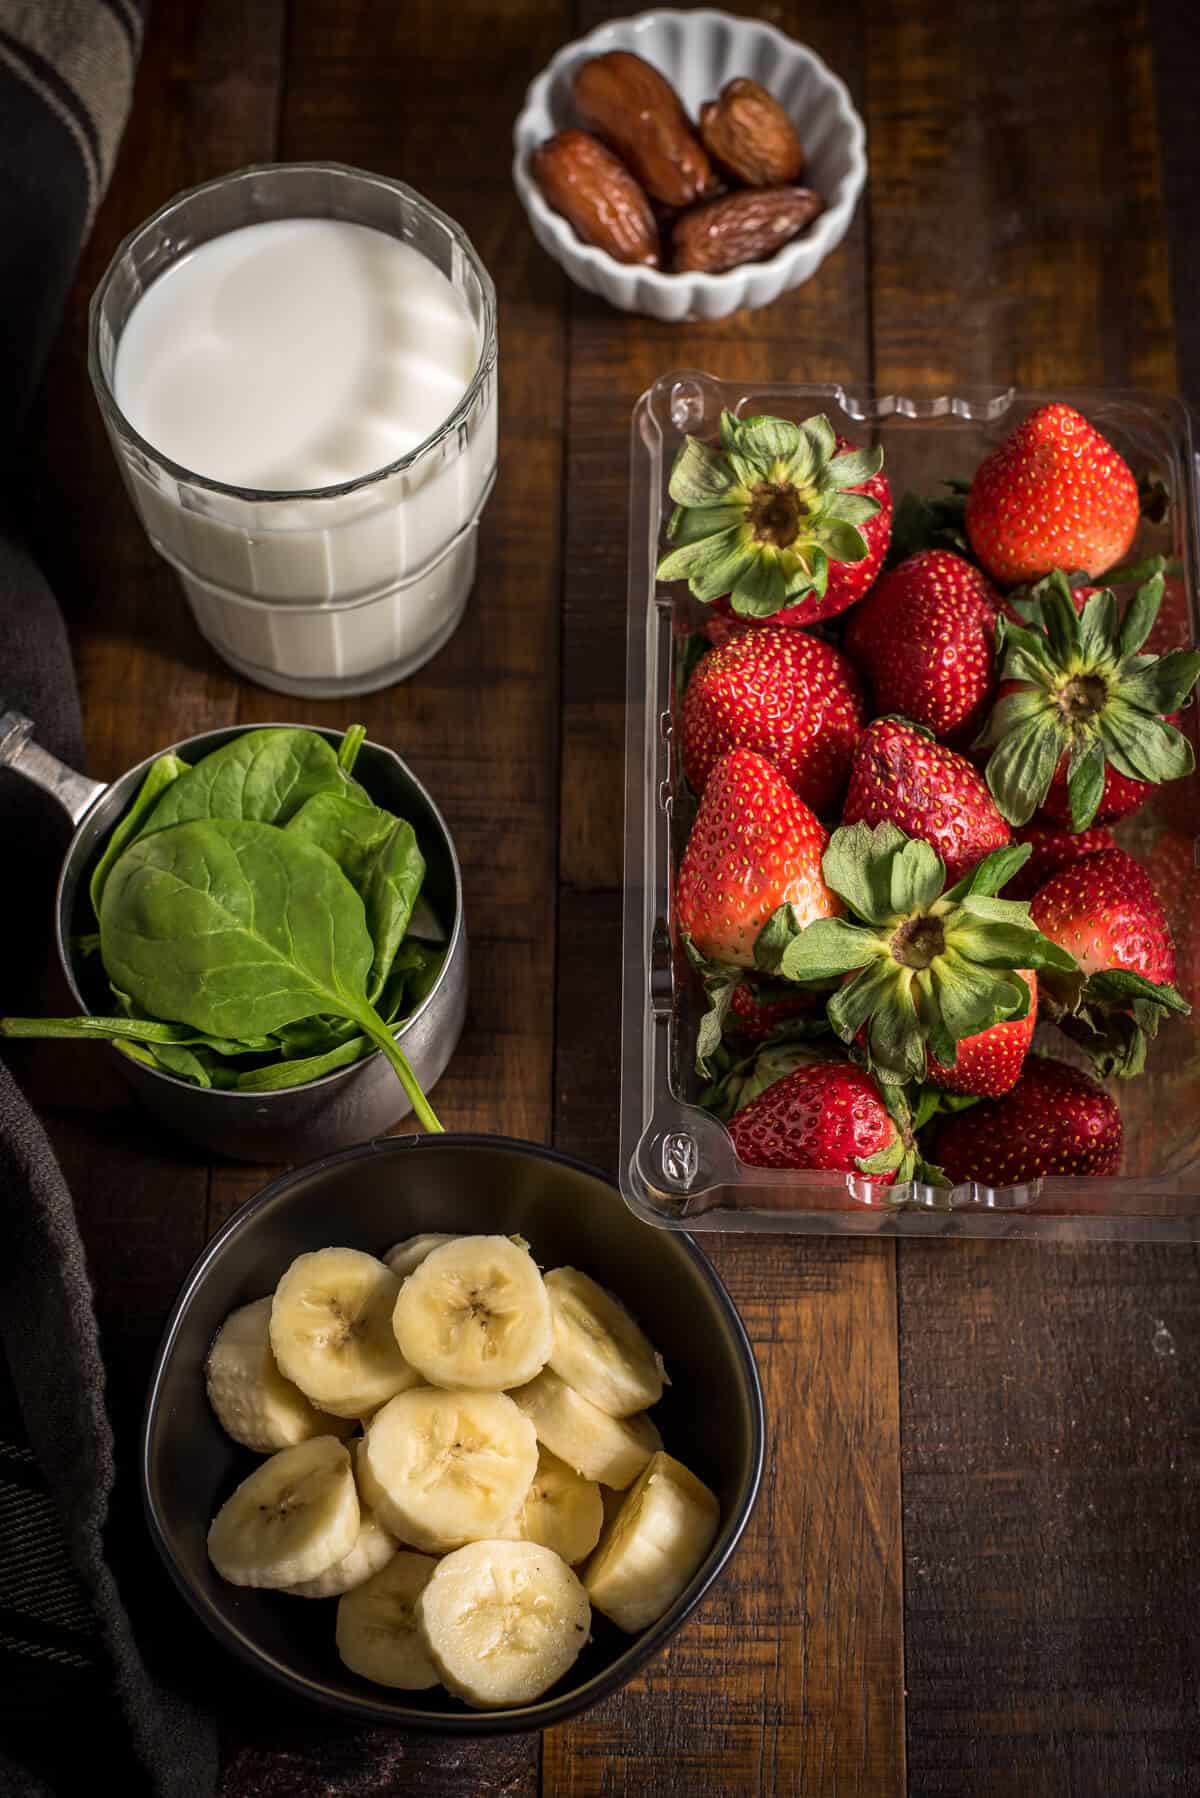 Strawberry Banana Spinach Smoothie Ingredients such as spinach, milk, banana, strawberry and dates are kept on a wooden surface